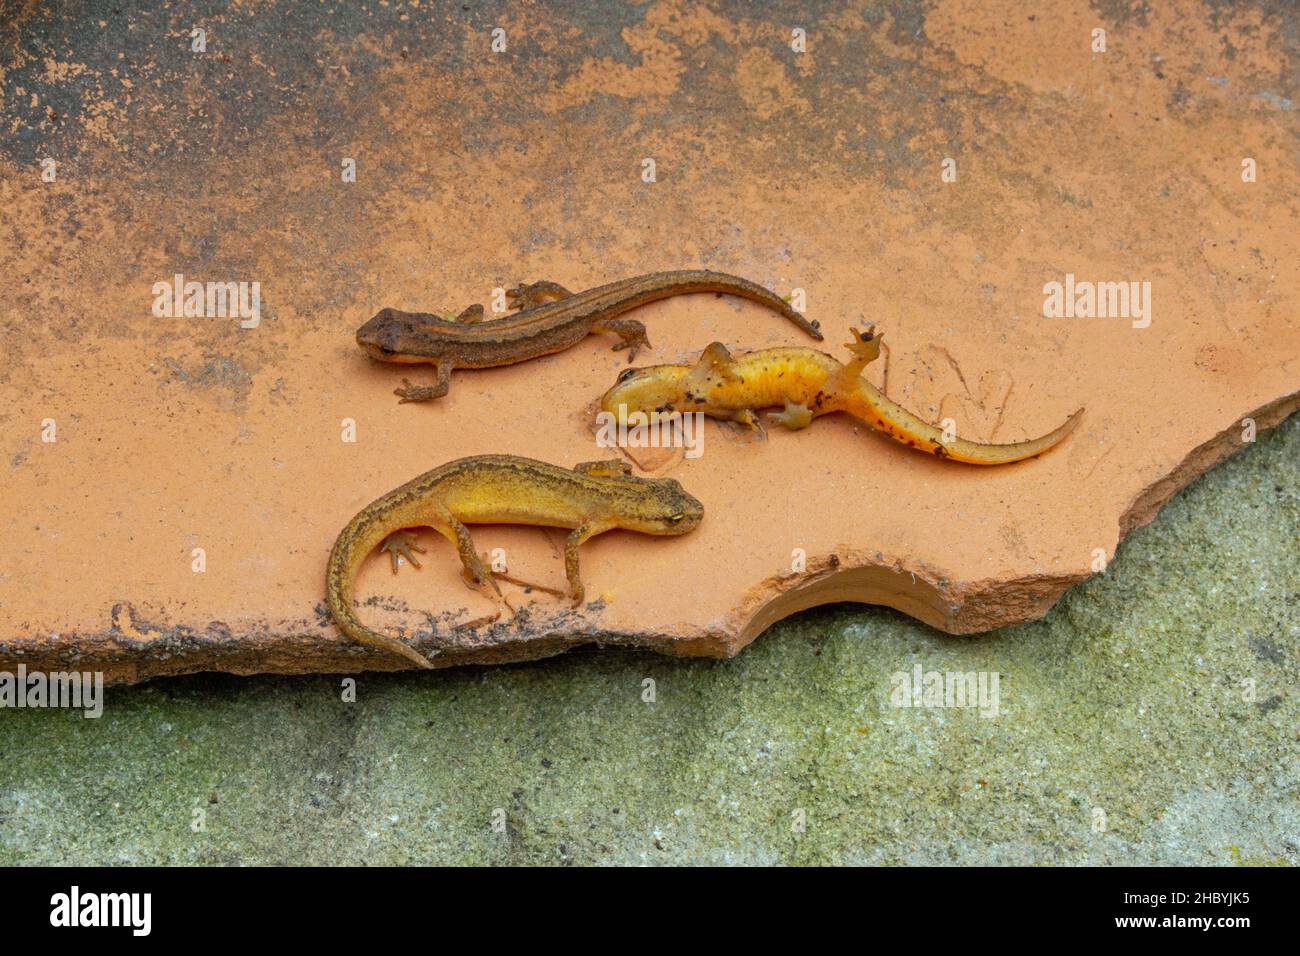 Juvenile, young, Smooth or Common Newts (Lissotriton vulgaris).  Discovered hiding under garden ceramic flower pots. Newts unharmed, feinging dead. Stock Photo